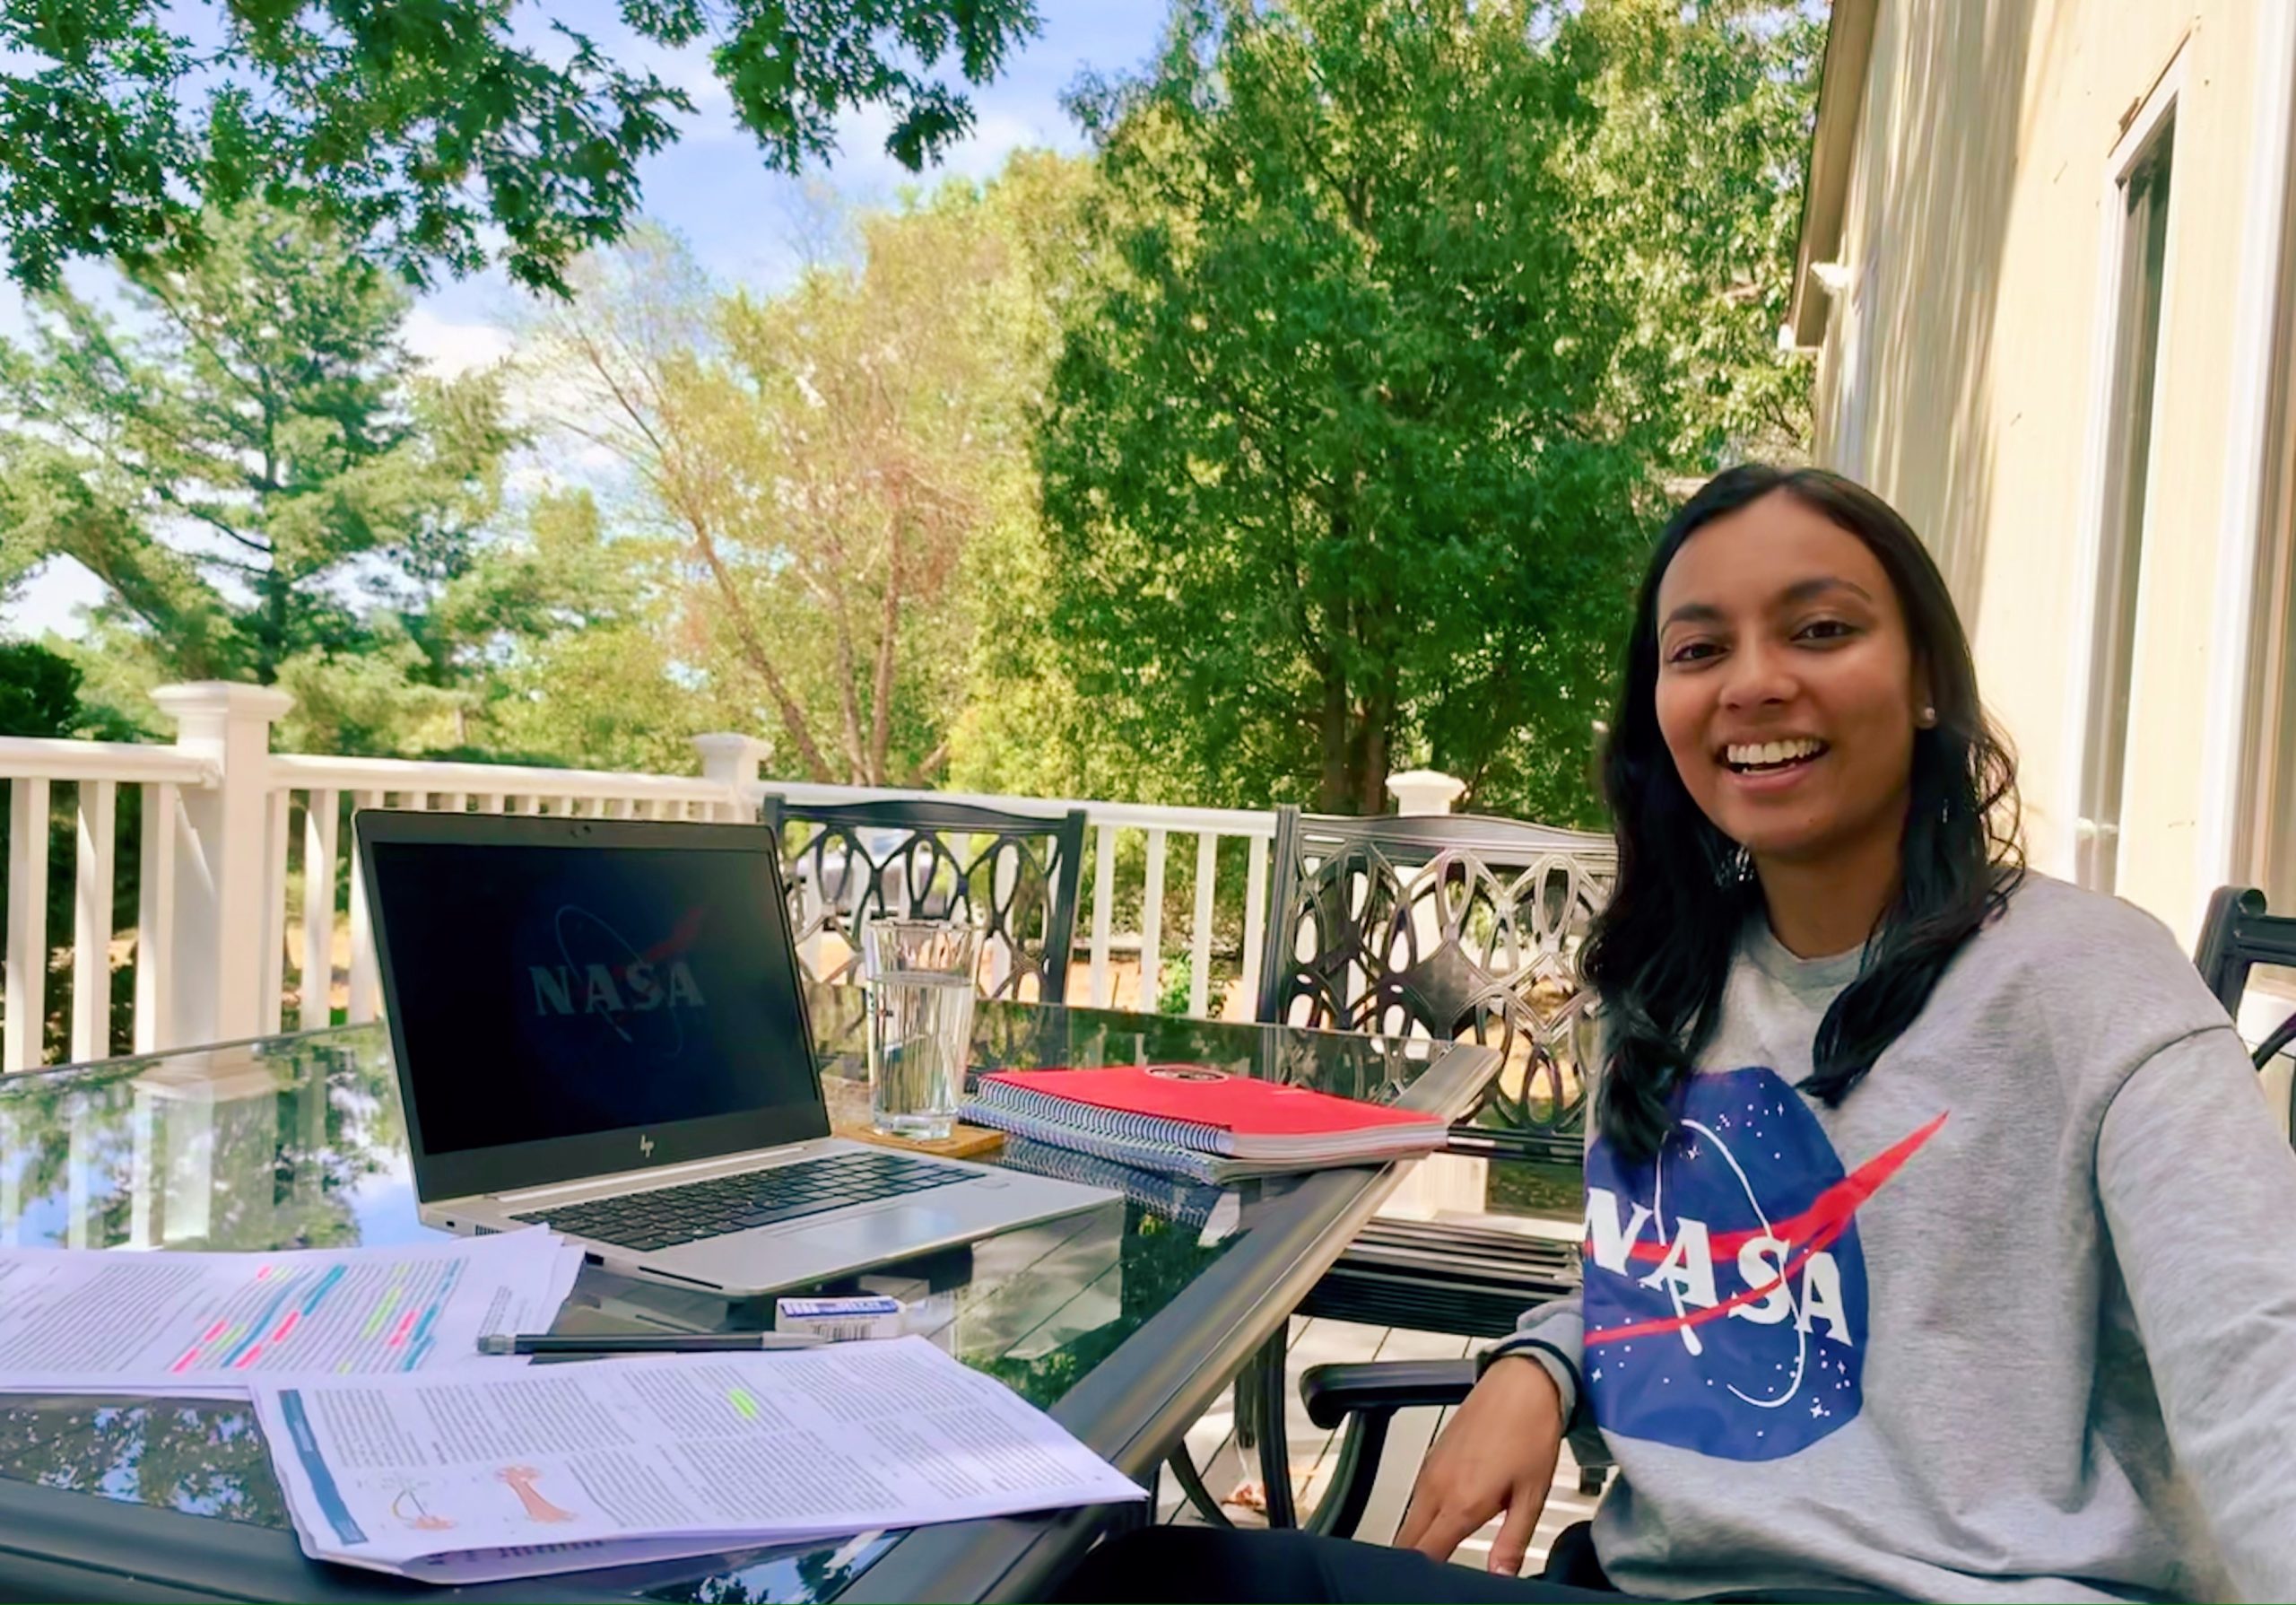 An intern sits next to an open laptop at a patio table.